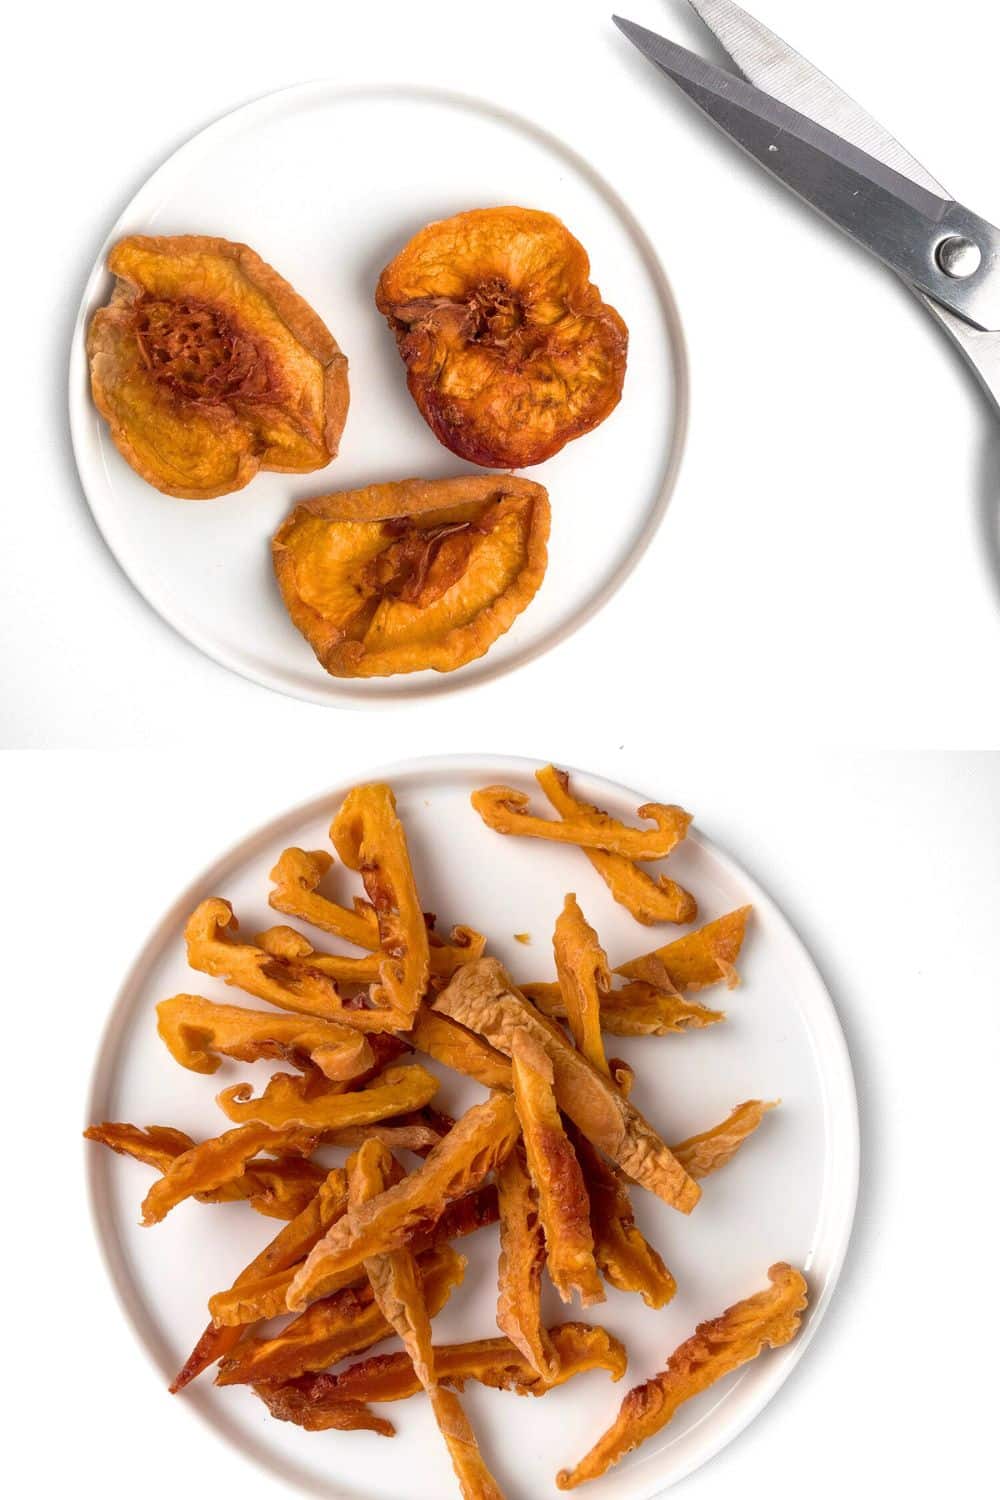 Top down view of three dried peaches on a white plate, next to some scissors, with a second plate with dried peaches cut into strips